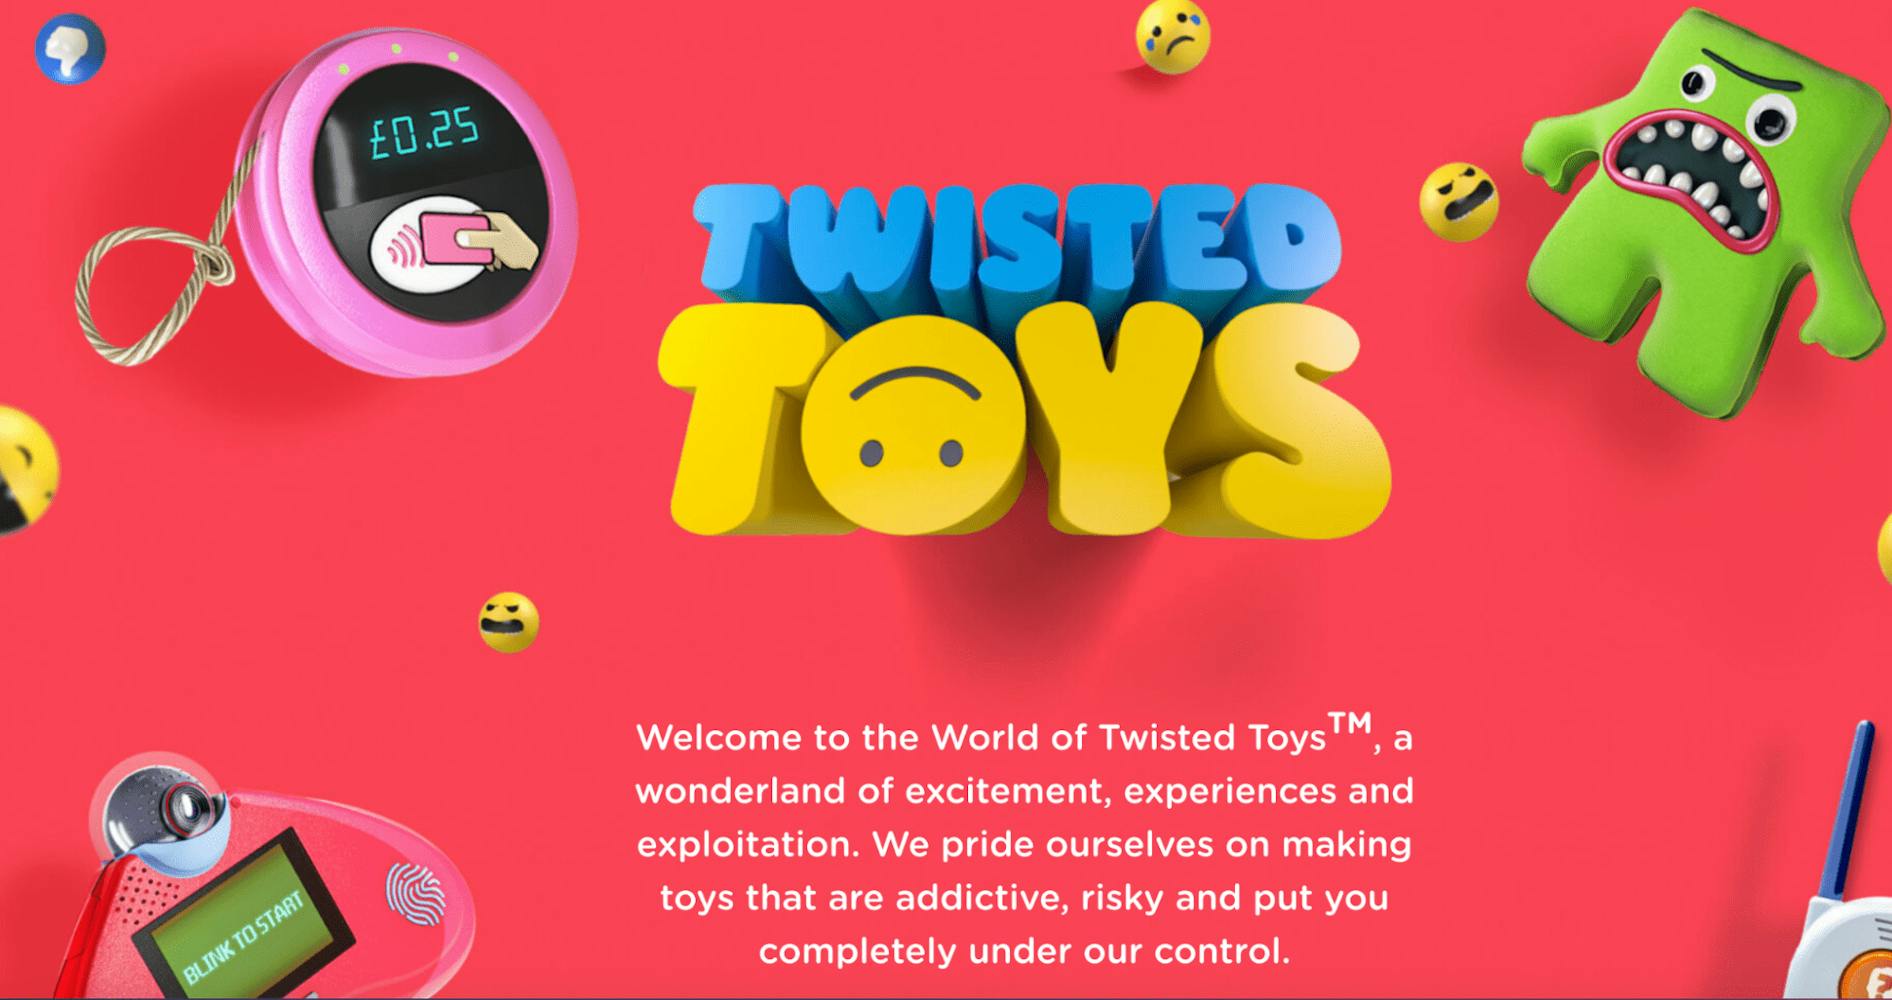 Image with text.
Title: Twisted Toys
Text ad: Welcome to the World of Twisted Toys, a wonderland of excitement, experiences and exploitation. We pride ourselves on making toys that are addictive, risky and put you completely under our control.